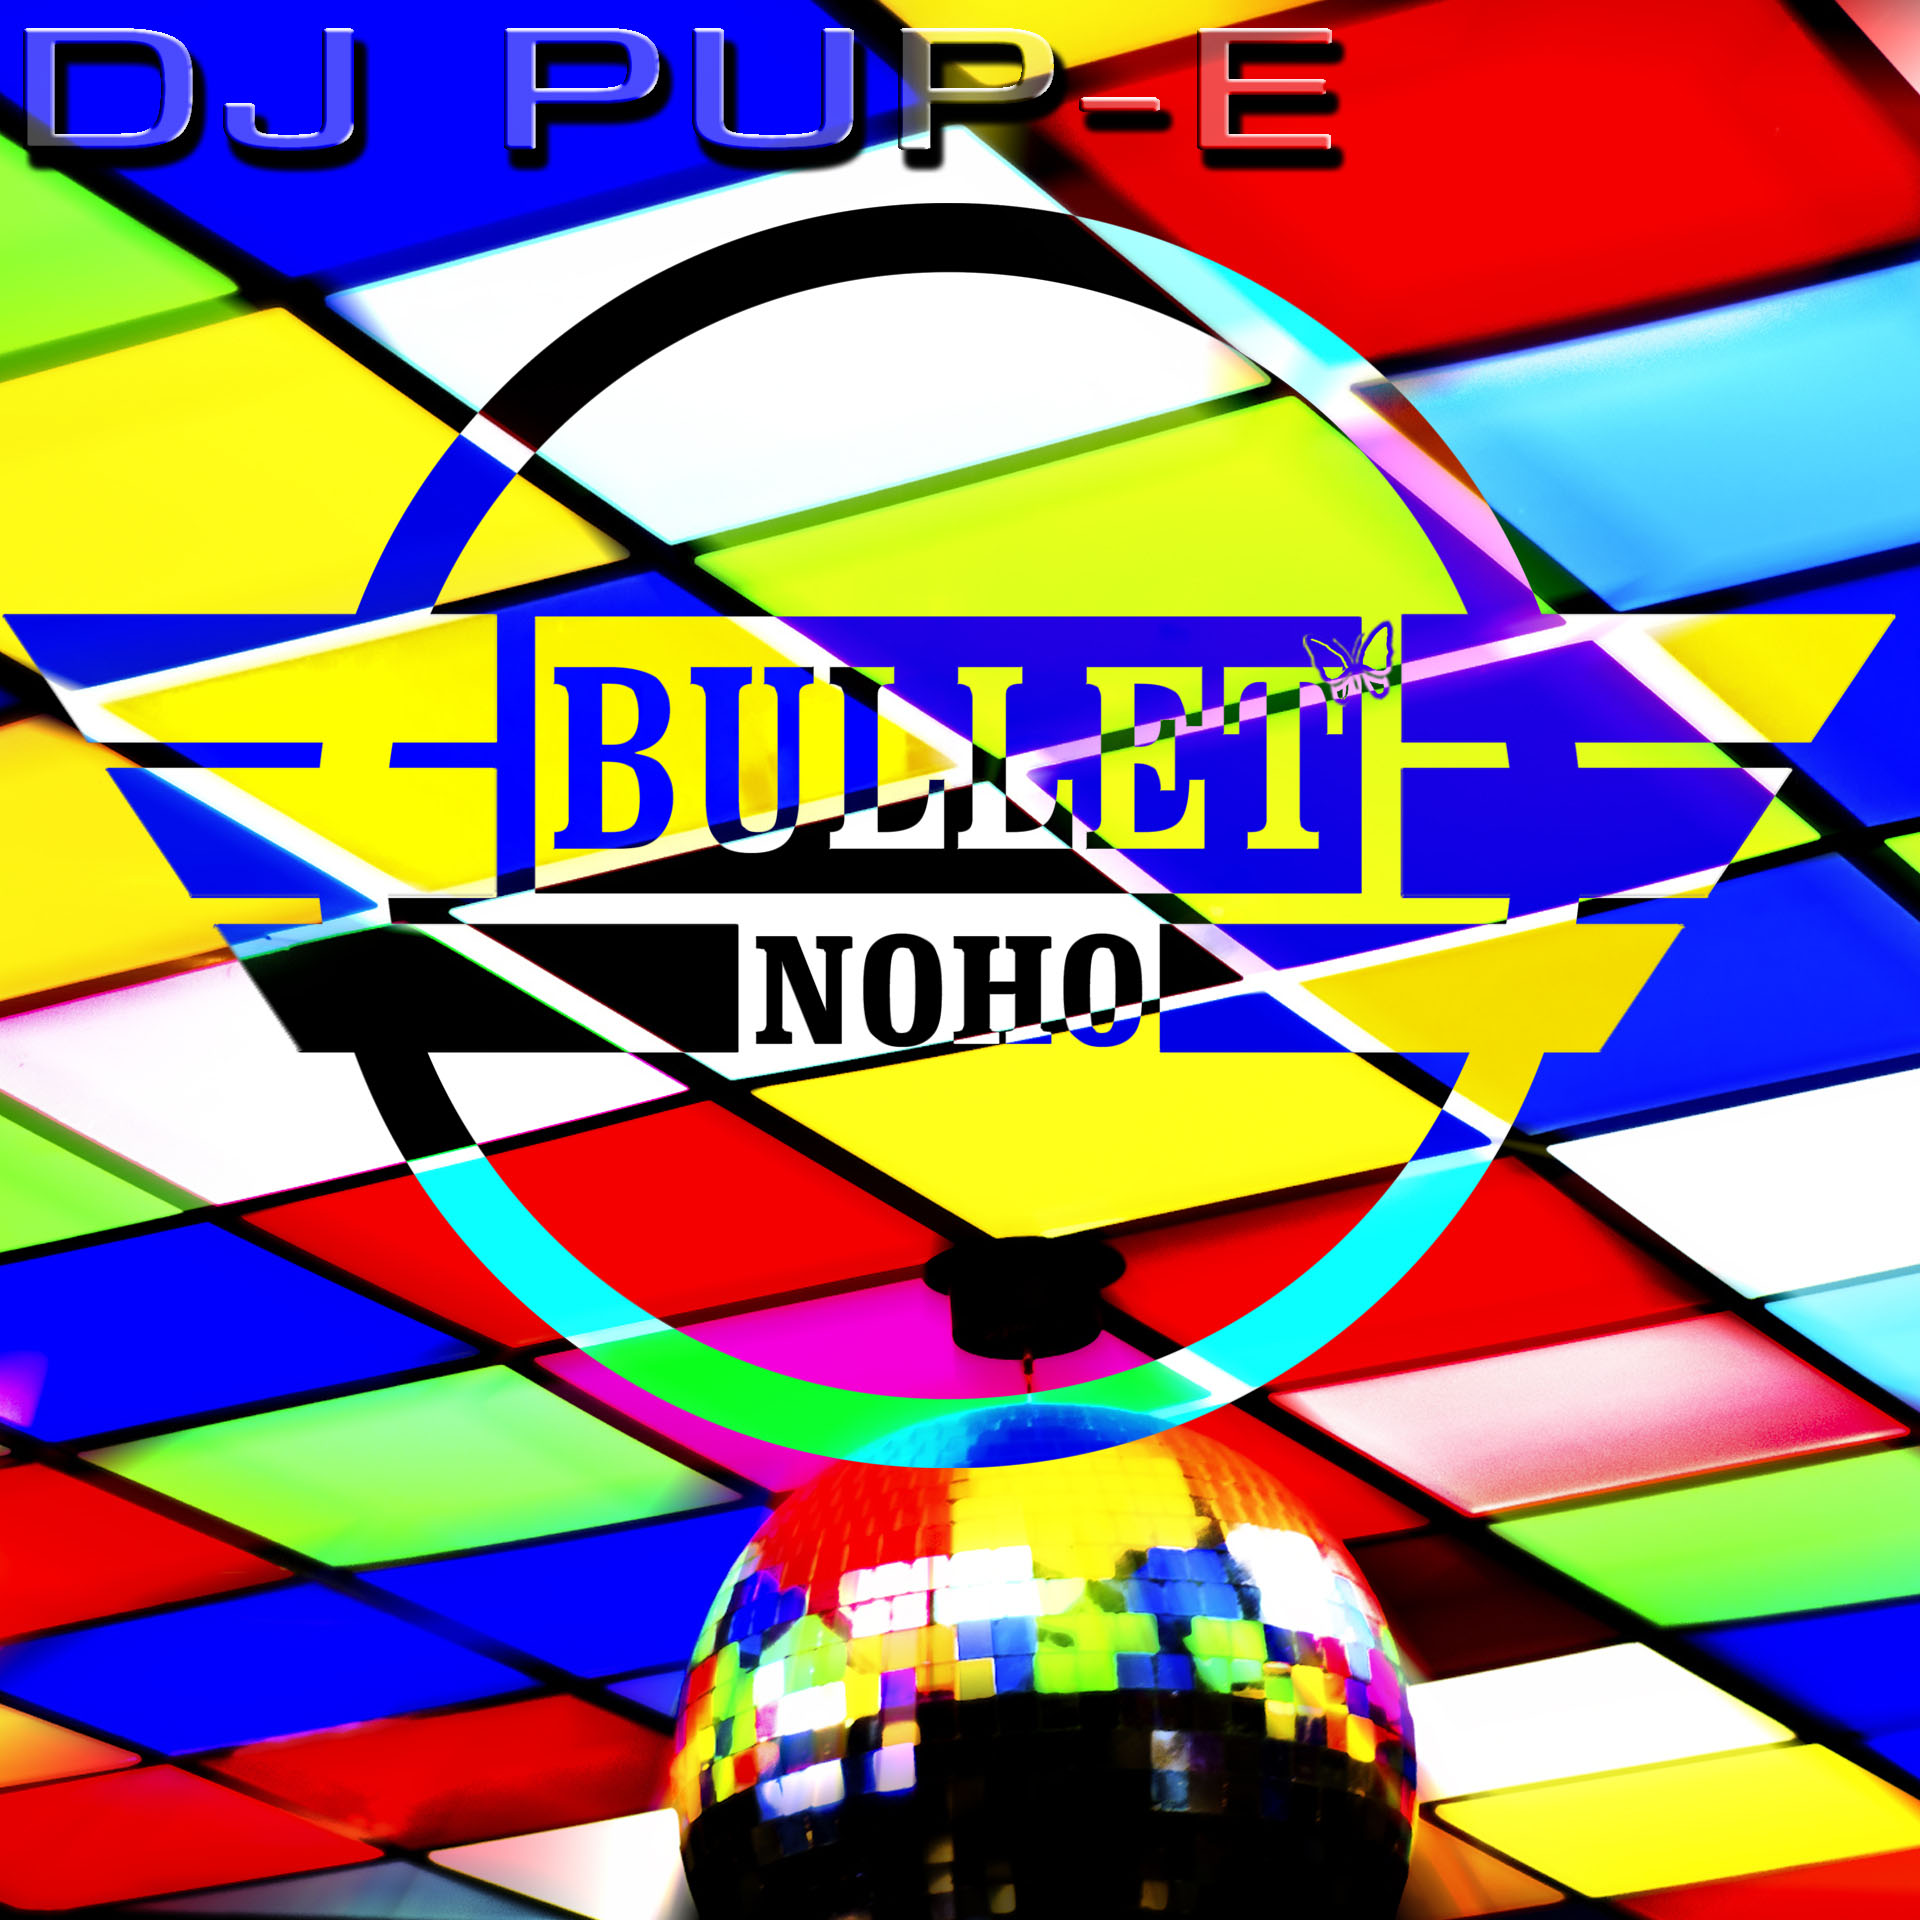 DJ PUP-E: Friday, 05/03/24 from 8:00 PM to 2:00 AM